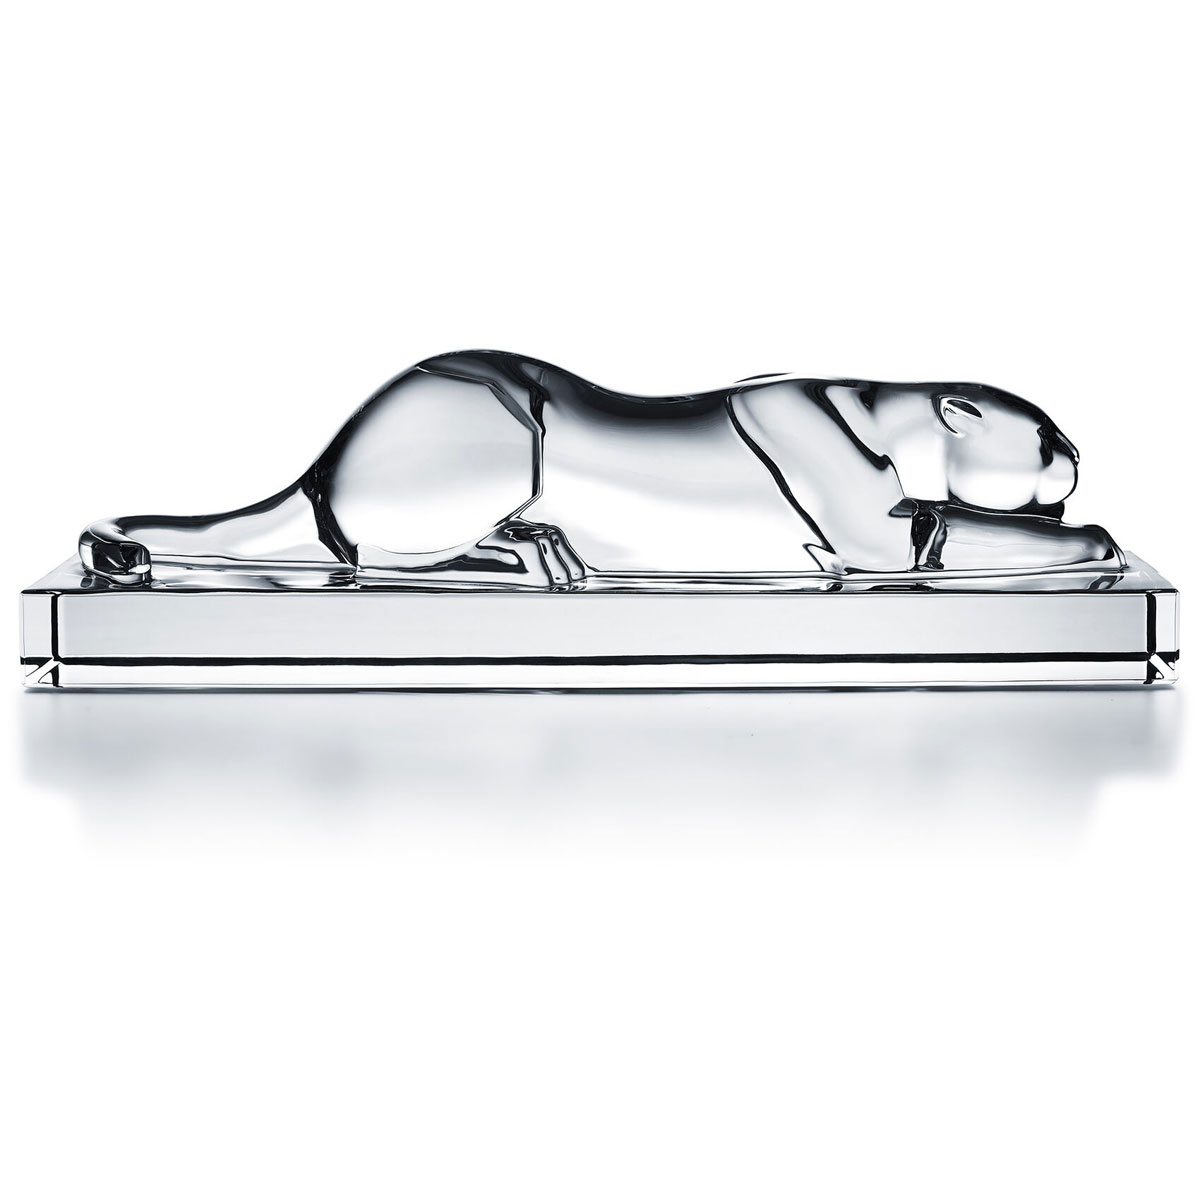 Baccarat Crystal, Heritage Panther, Limited Edition